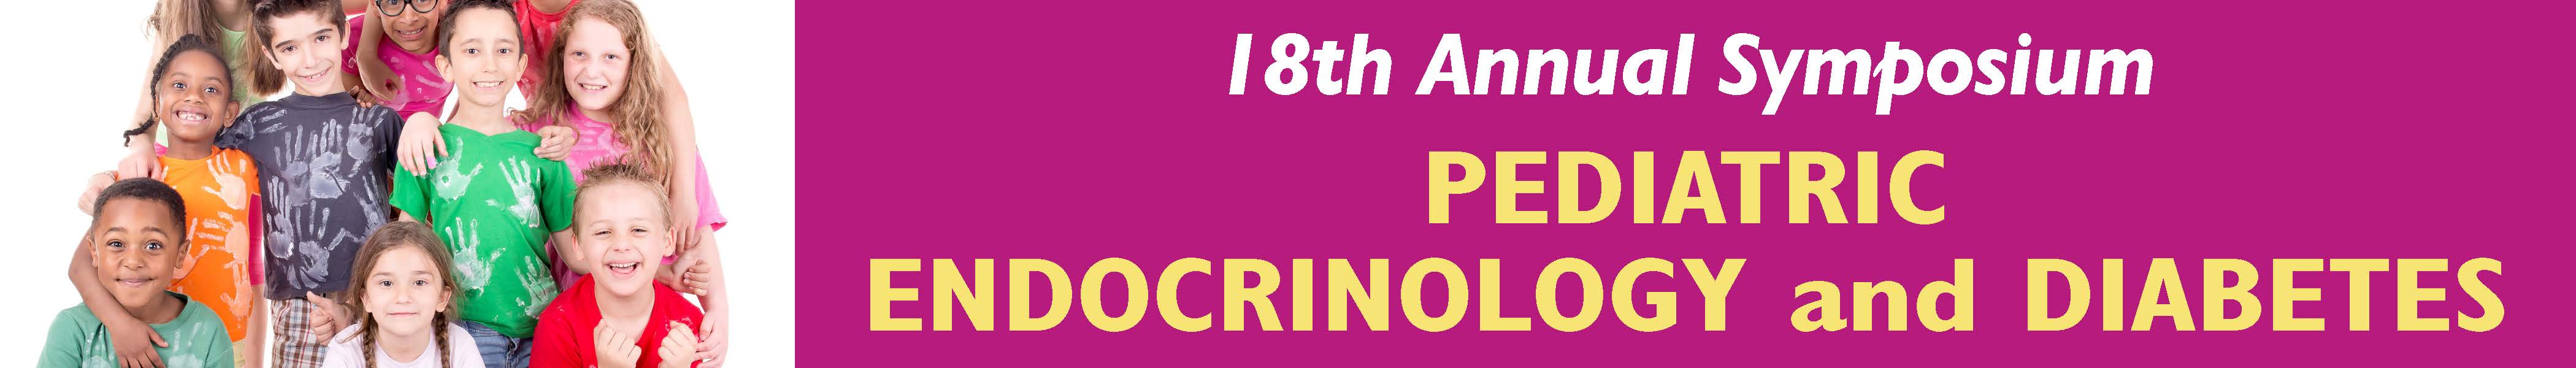 Eighteenth Annual Pediatric Endocrinology and Diabetes Symposium Banner